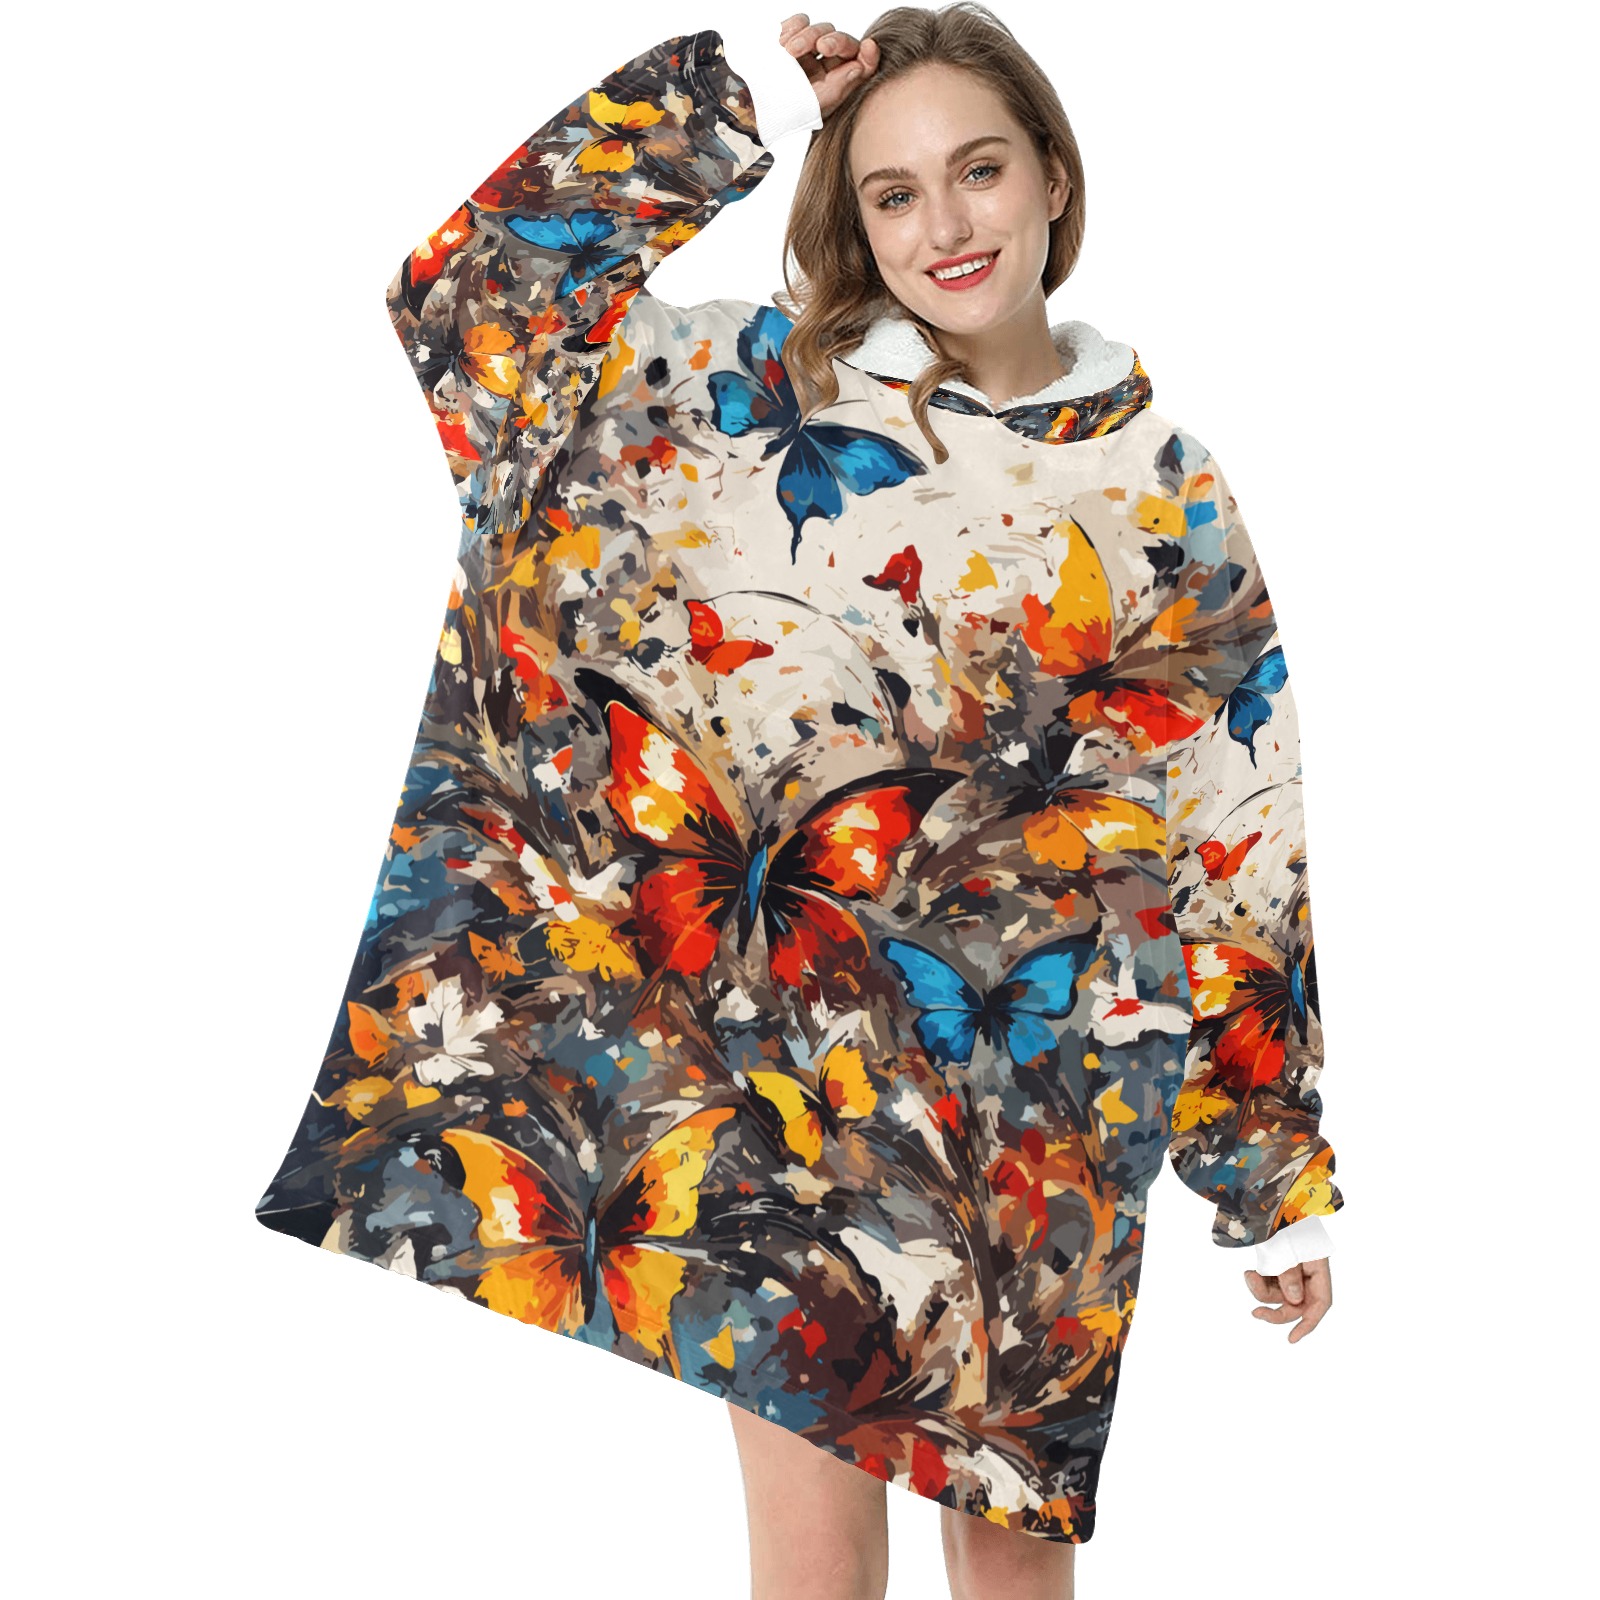 Decorative art of colorful butterflies and flowers Blanket Hoodie for Women